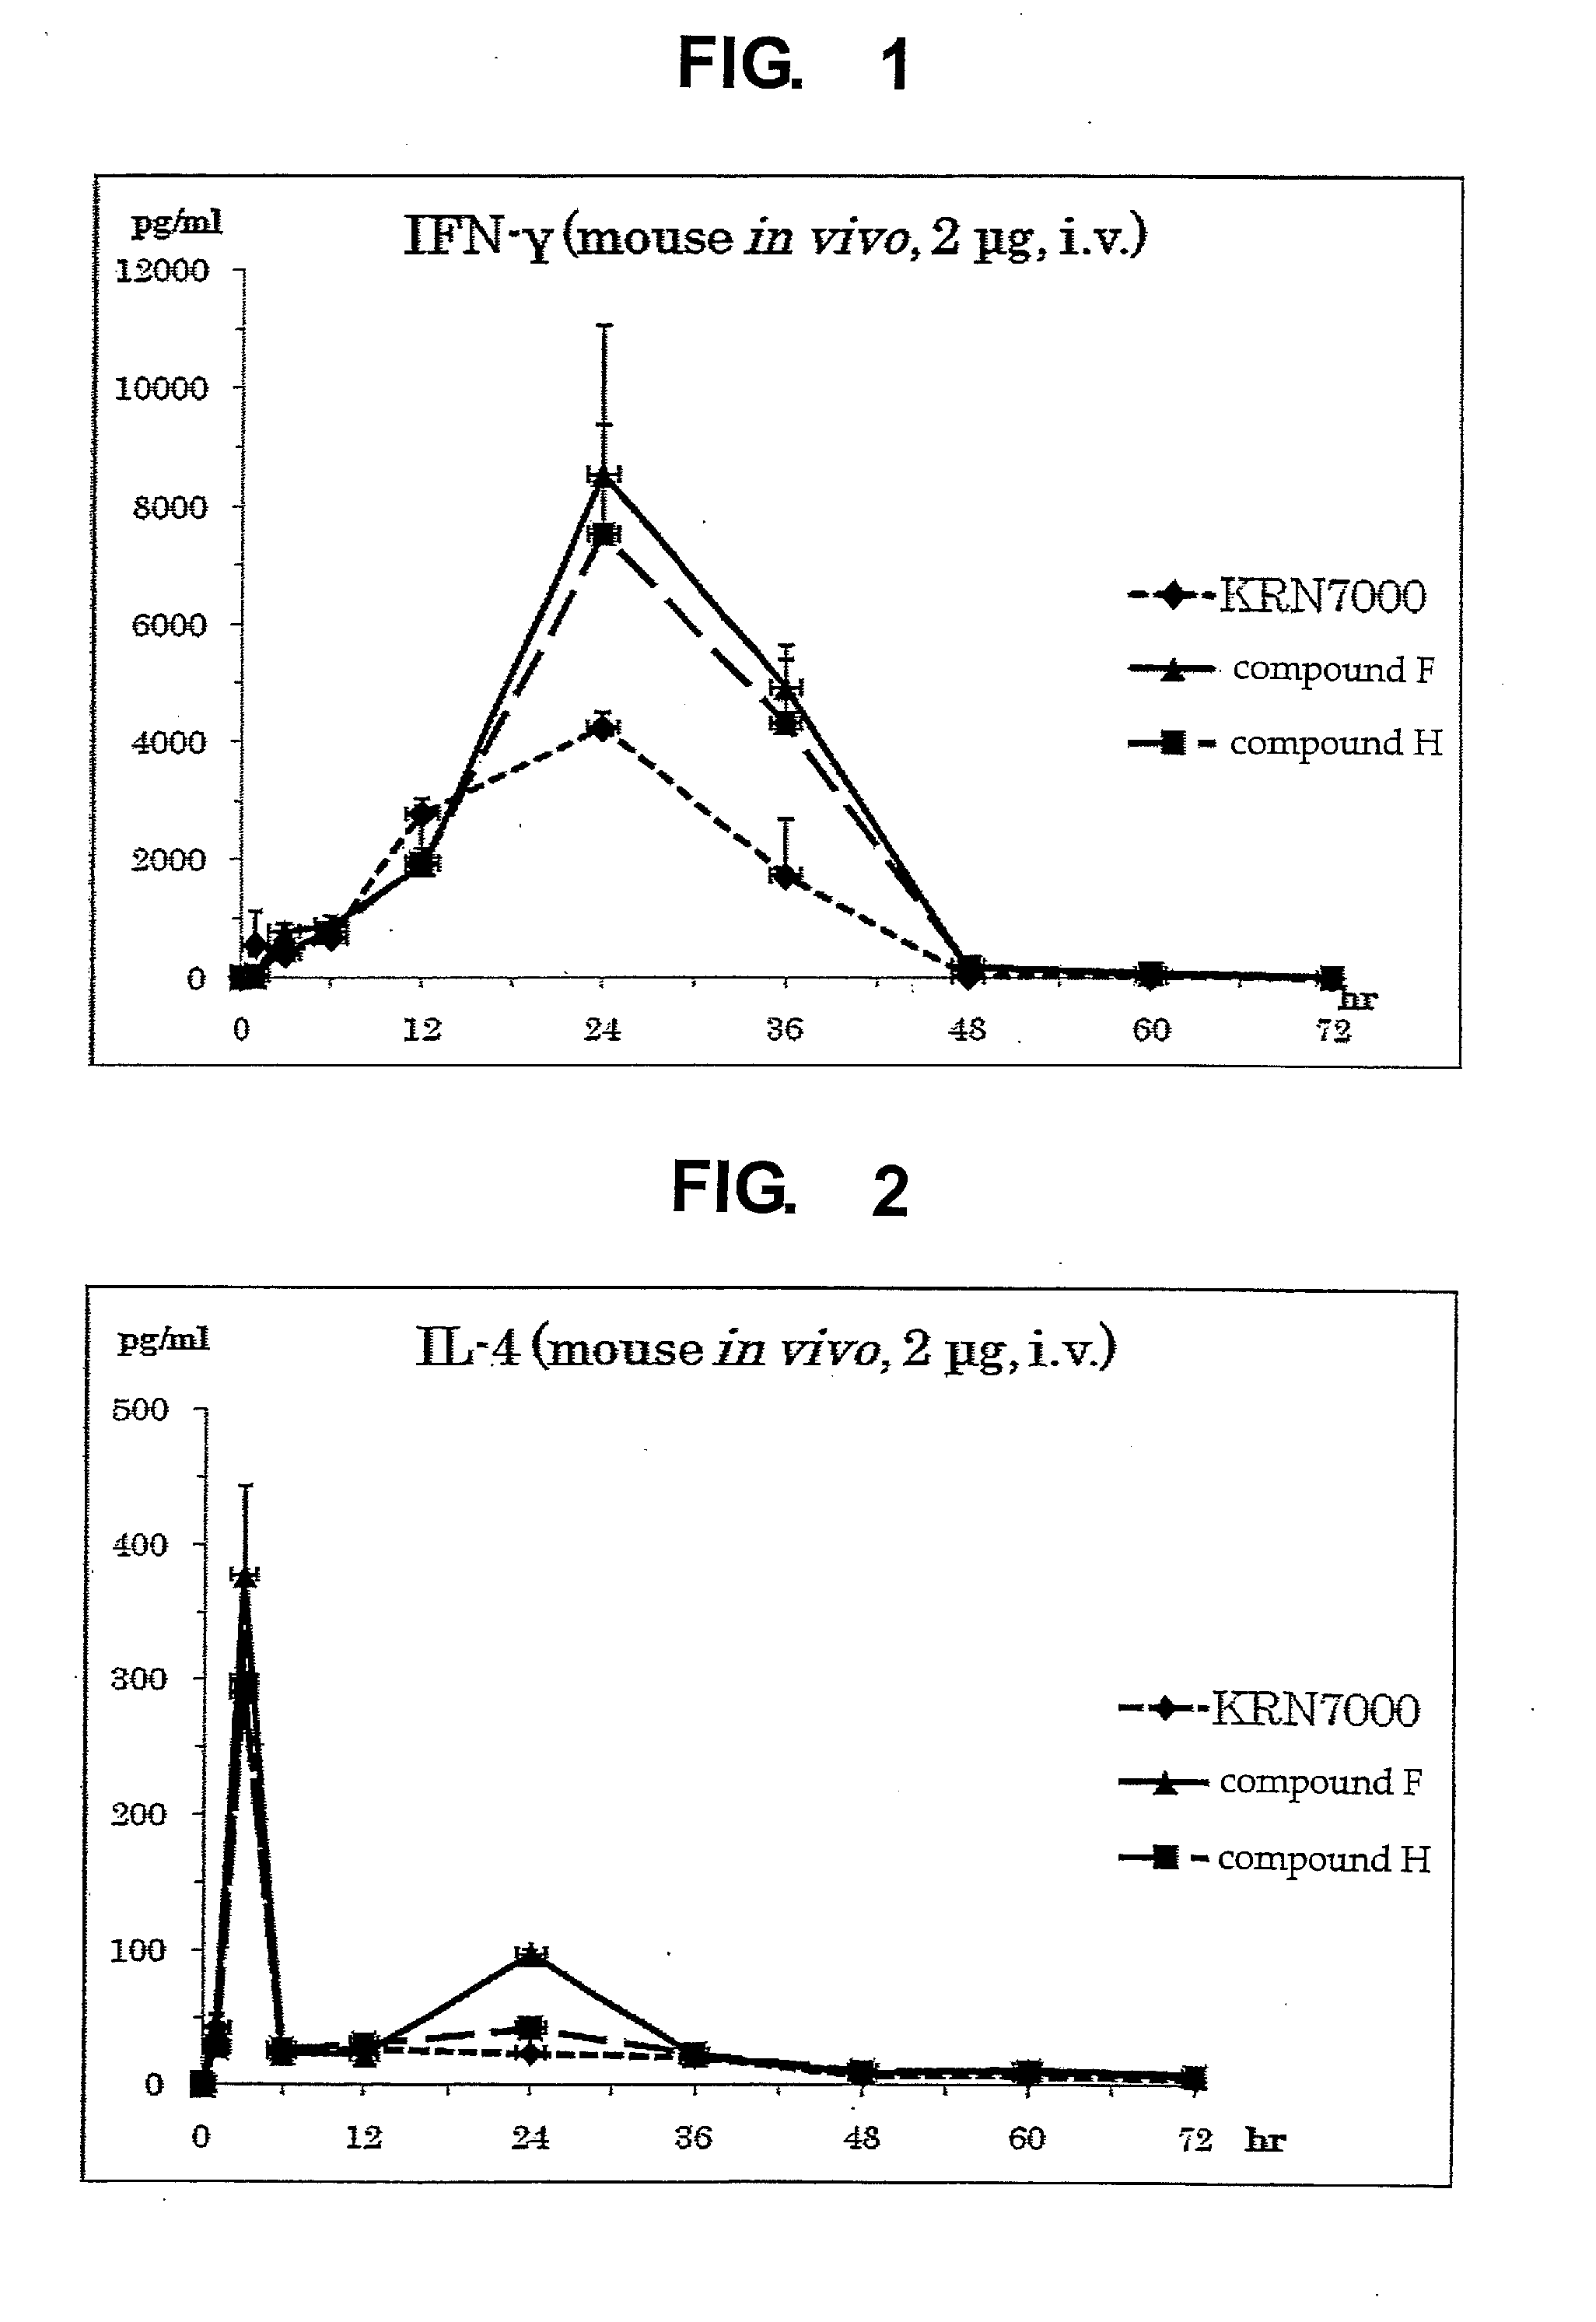 Novel synthetic glycolipid and use thereof